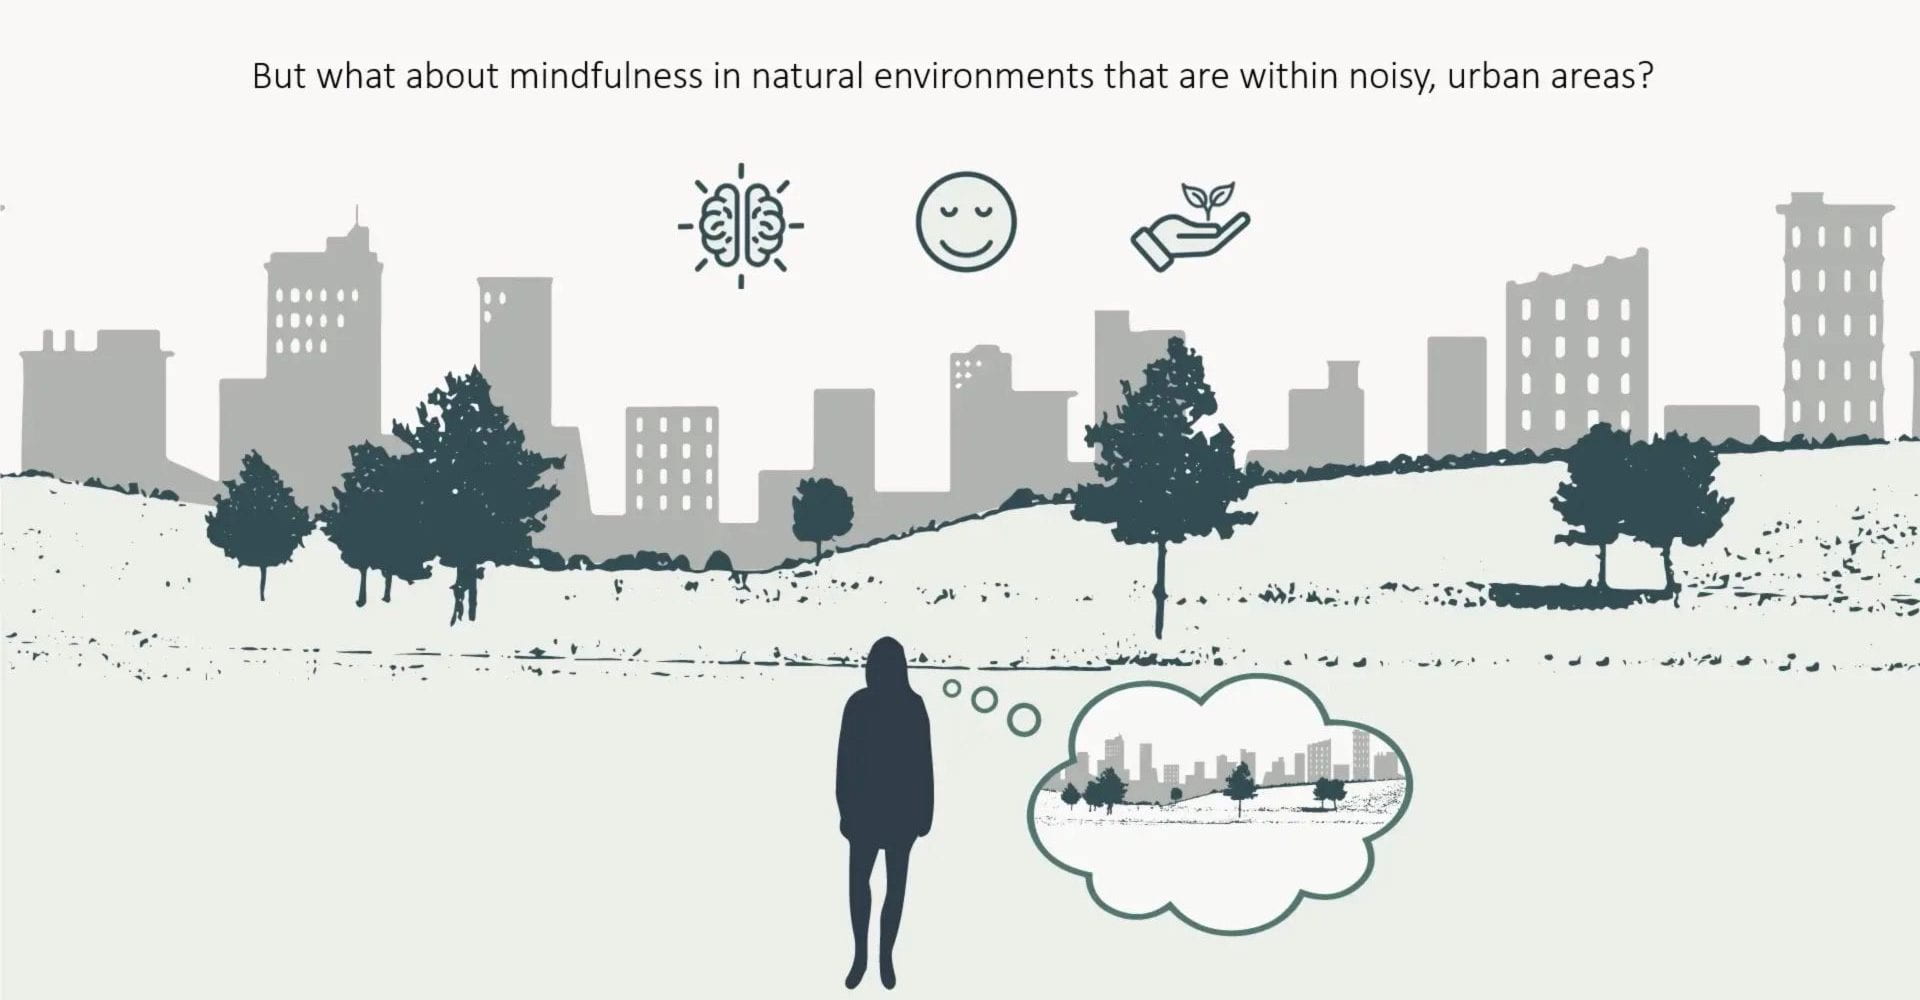 video about mindful engagement in nature